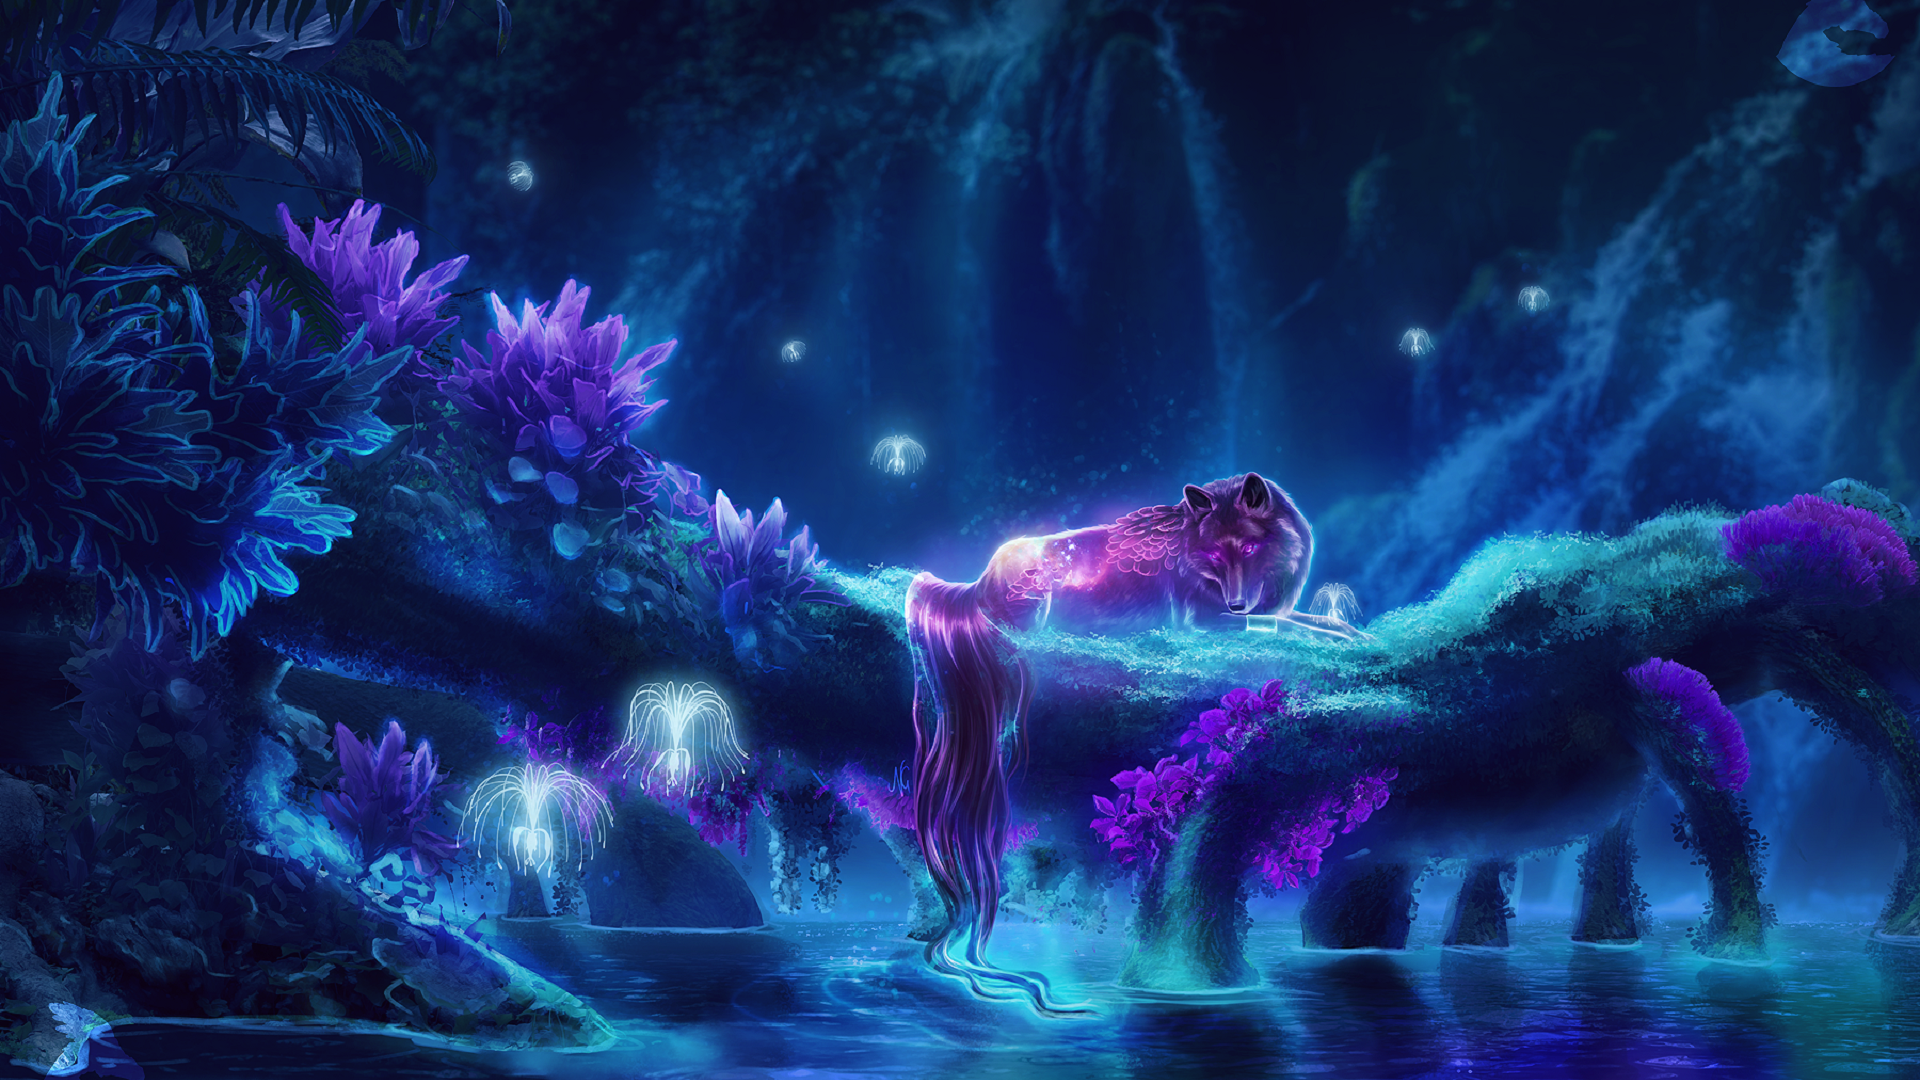 Download 1920x1080 Fantasy Creature, Wolf, Forest, Water, Magical Creatures, Night Wallpaper for Widescreen